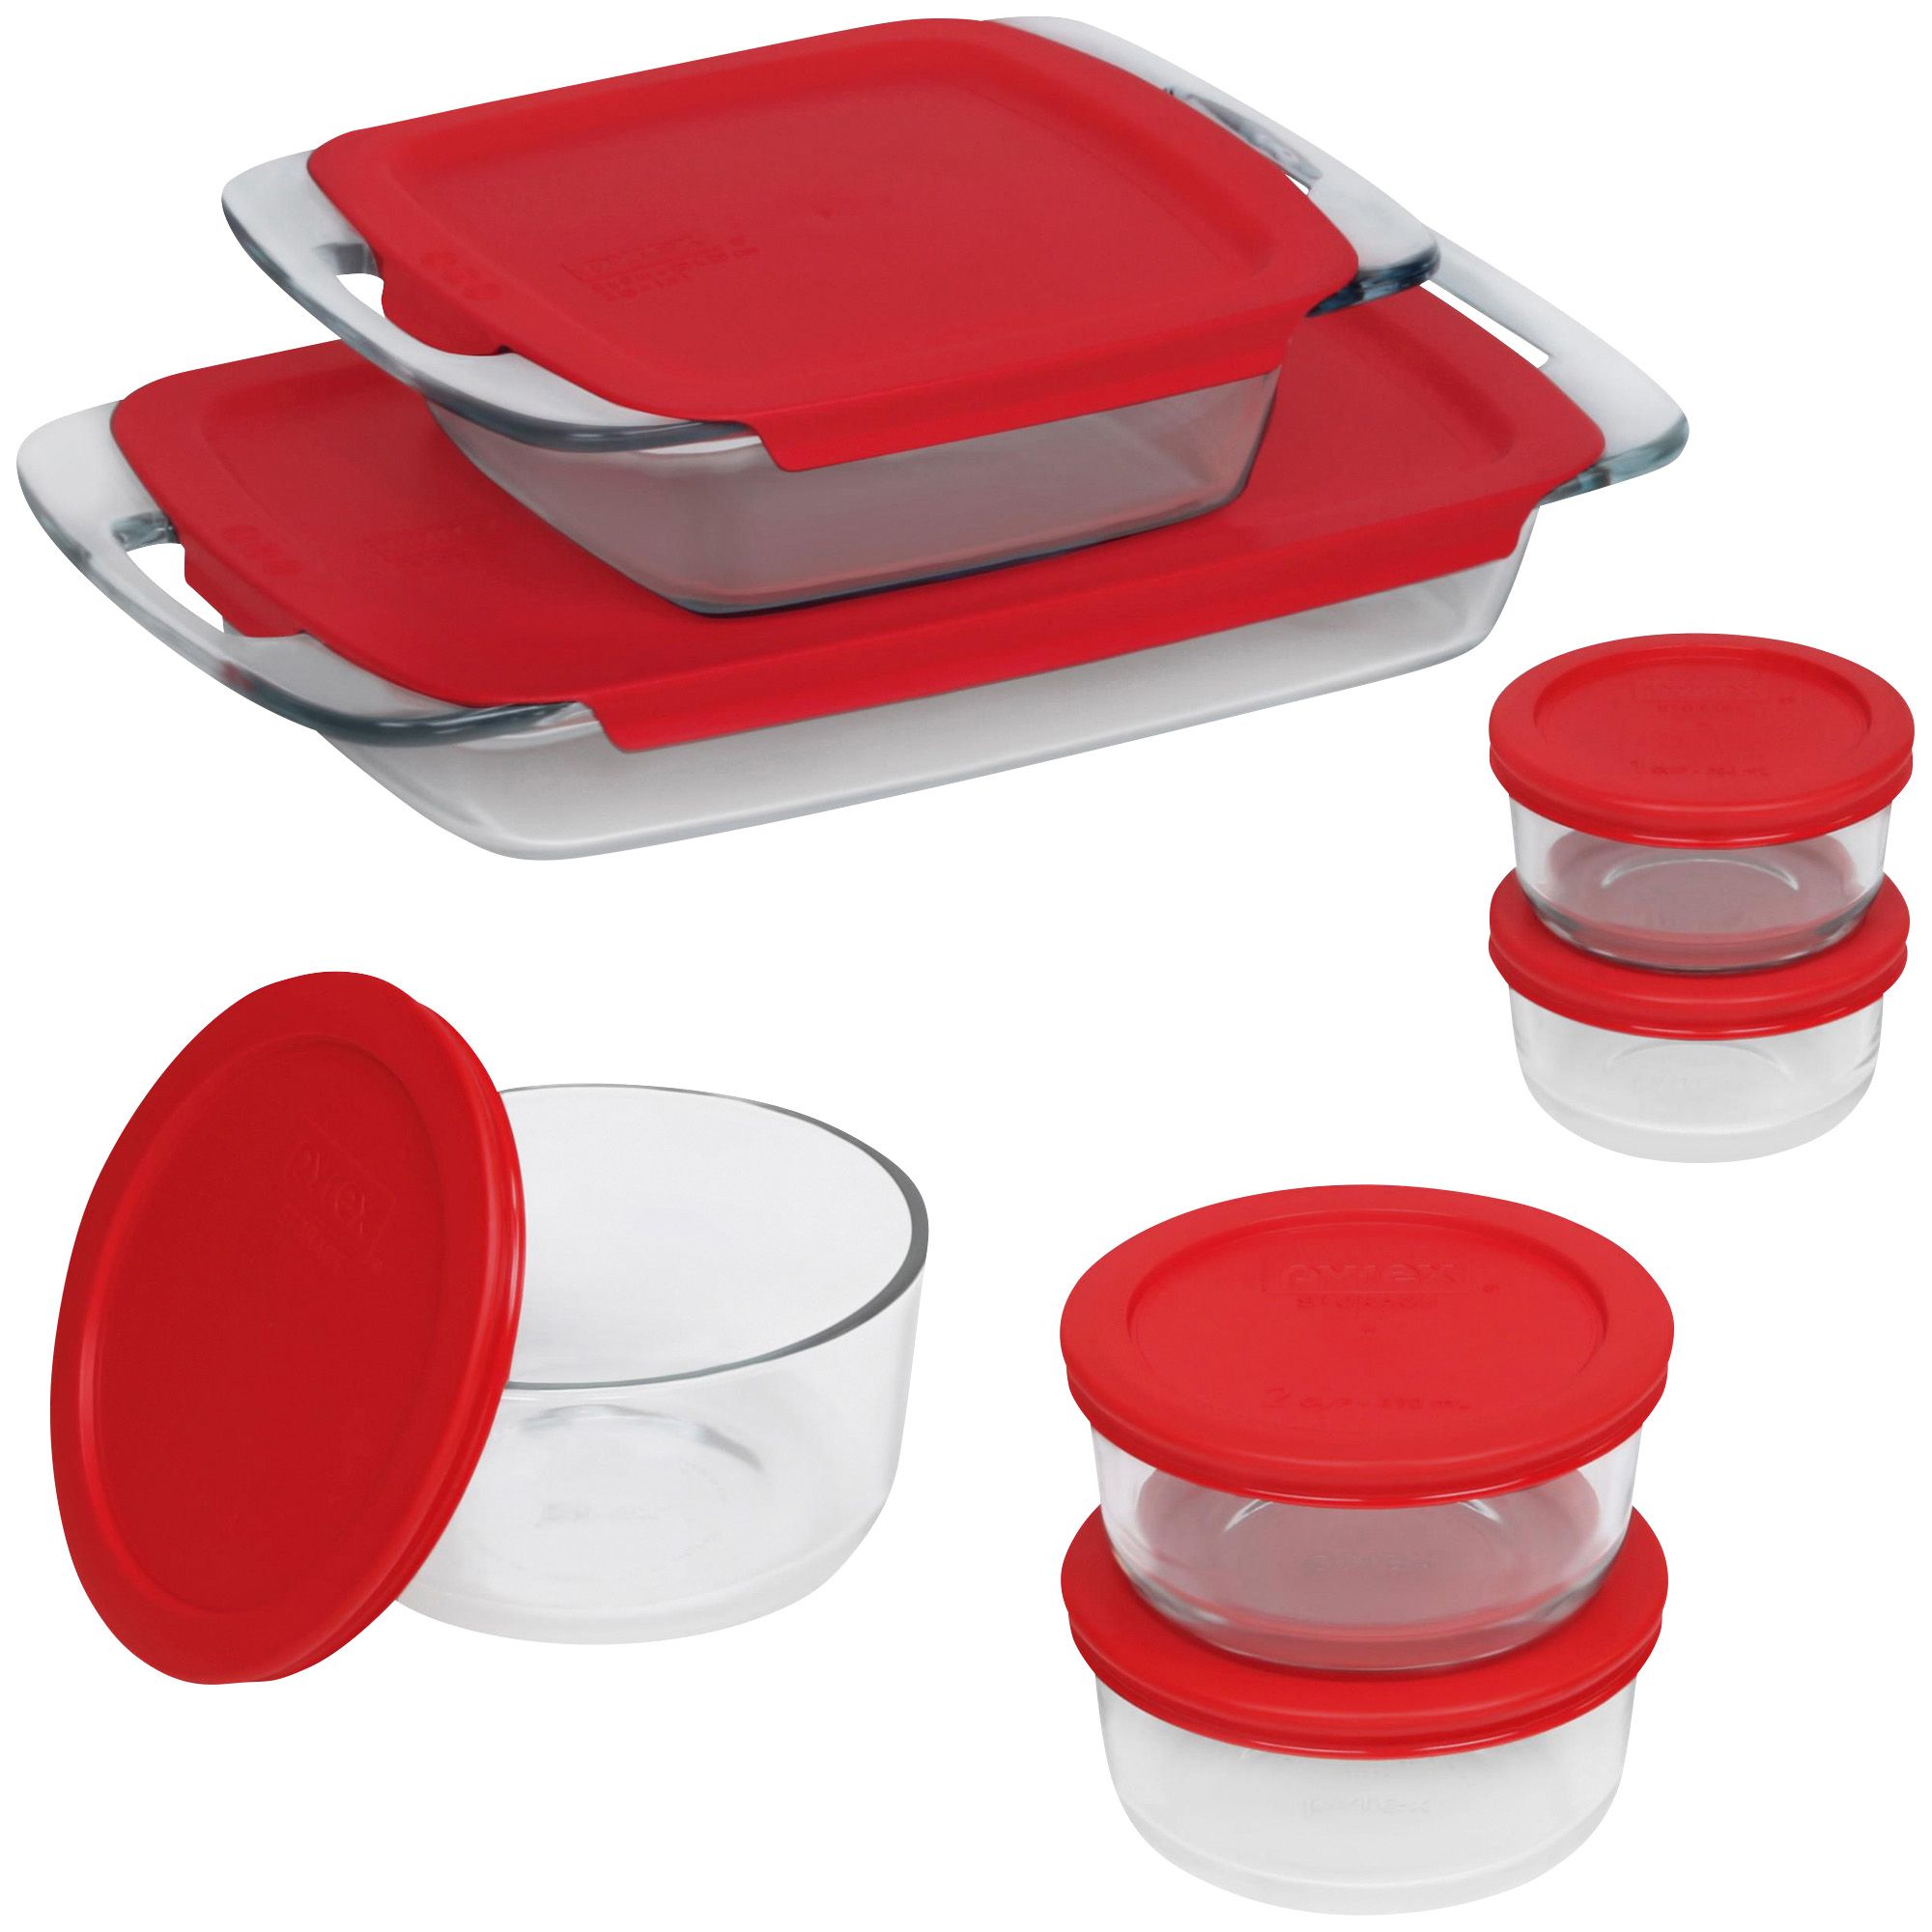 Pyrex 1-Cup Glass Storage Dish with Lid - 8 Piece - Red, 8 Piece